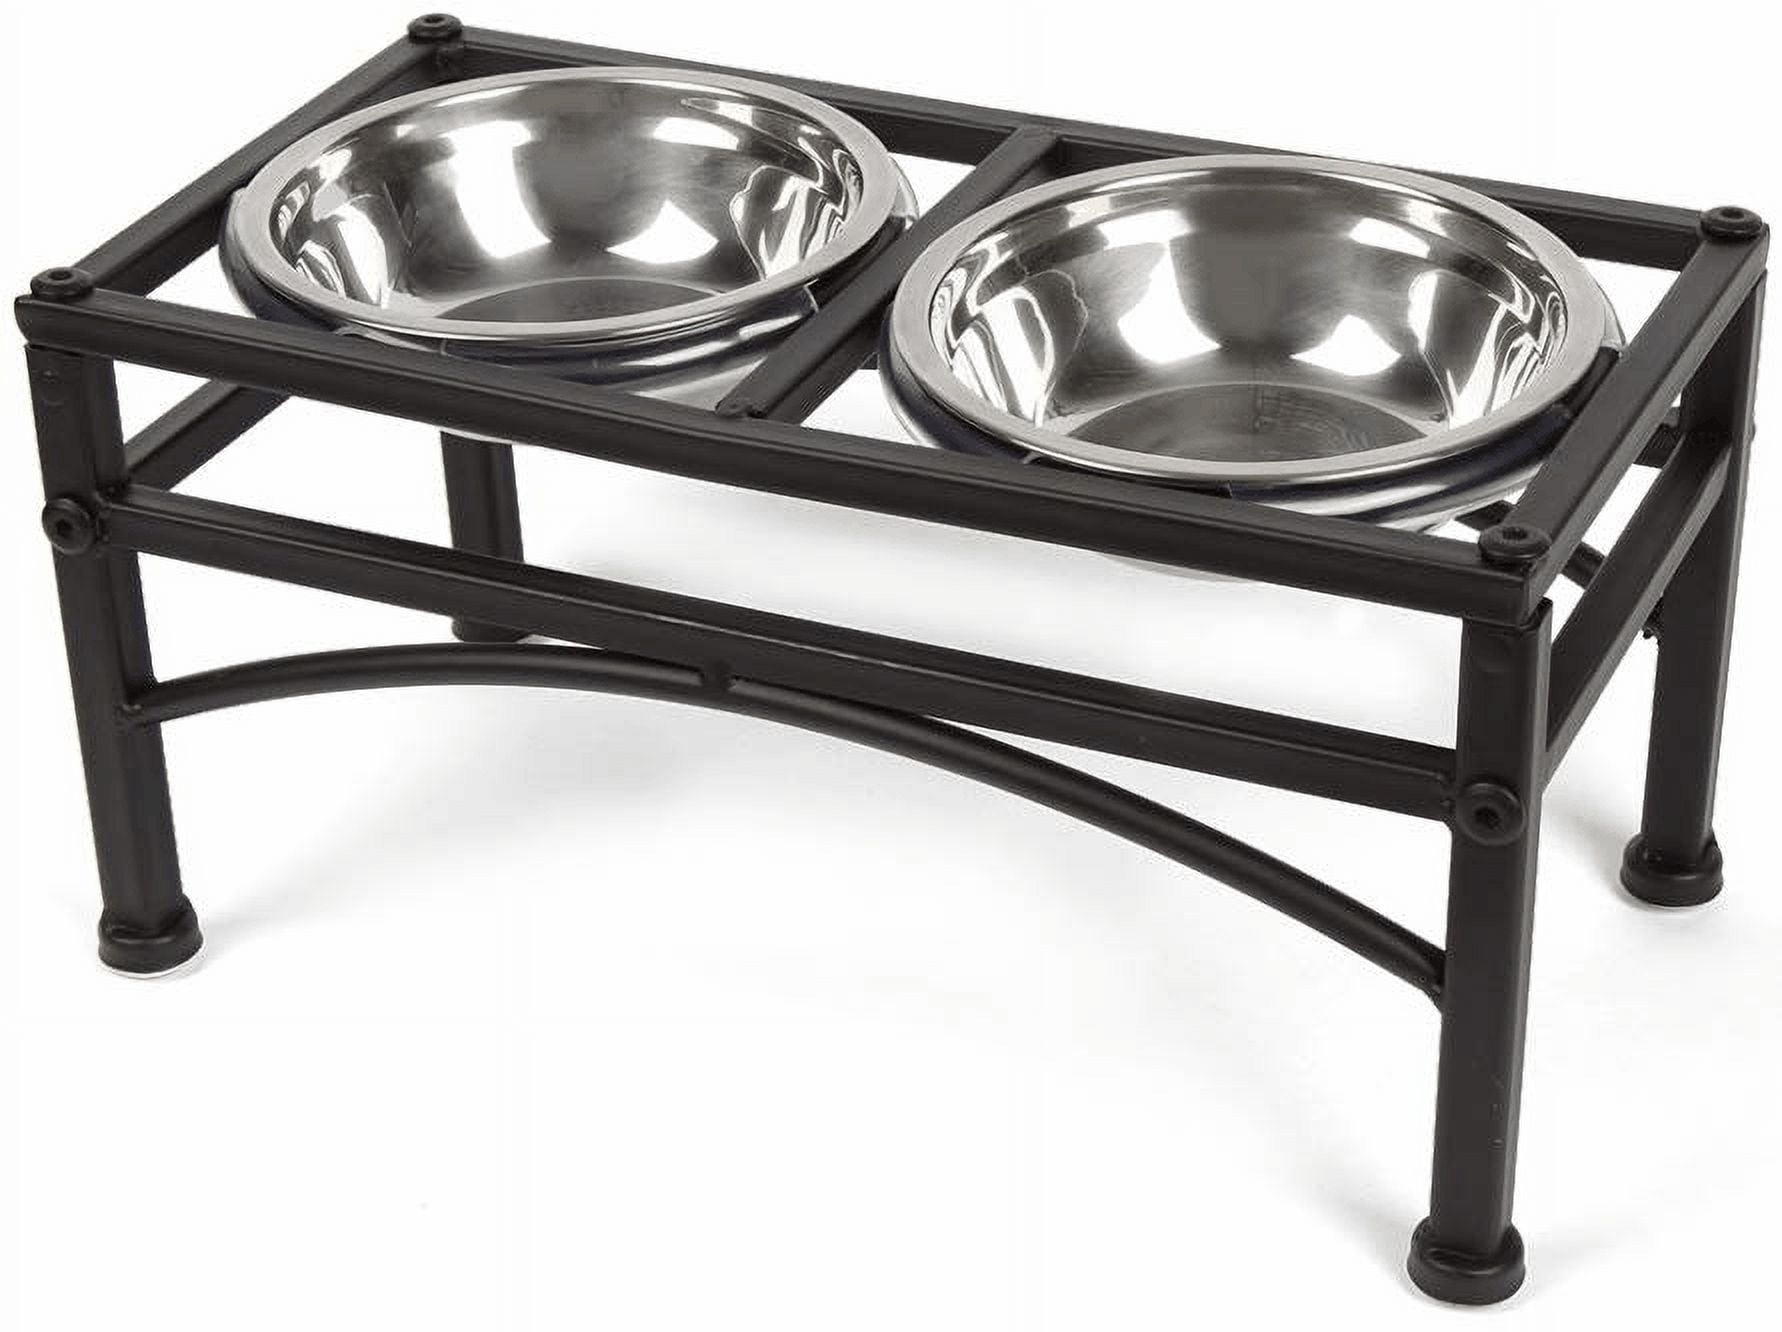 10 Elevated Raised Dog Feeder Stainless Steel Double Bowl Food Water Pet  Dish, 1 Unit - Kroger